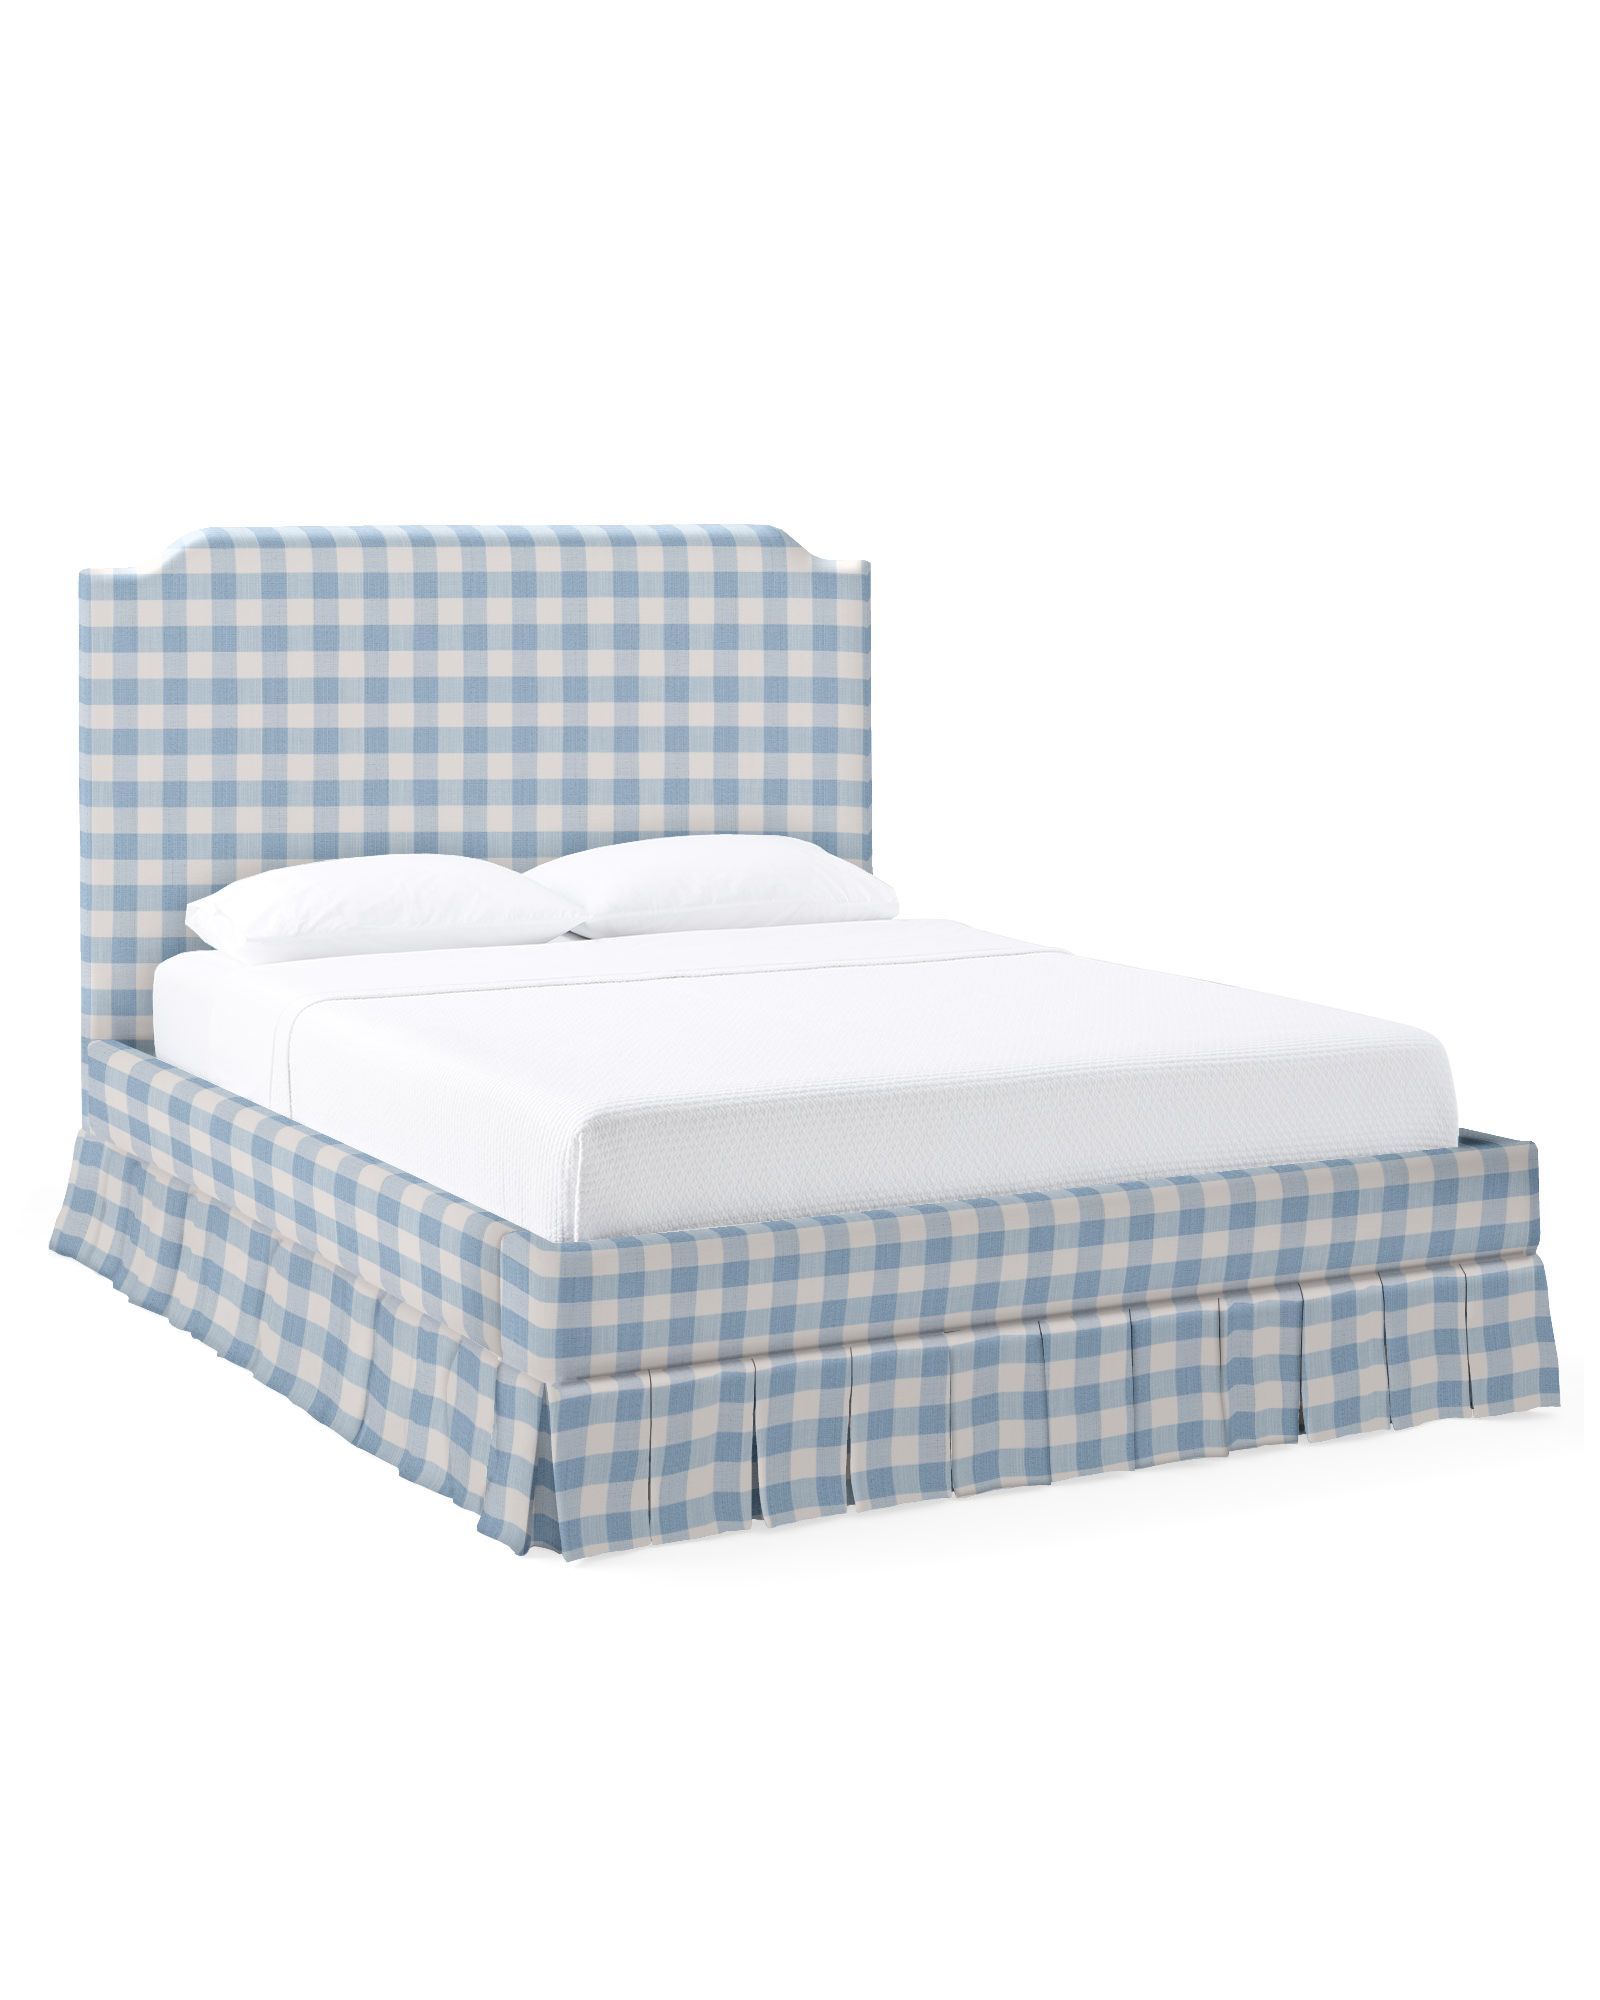 Eastgate Pleated Bed | Serena and Lily